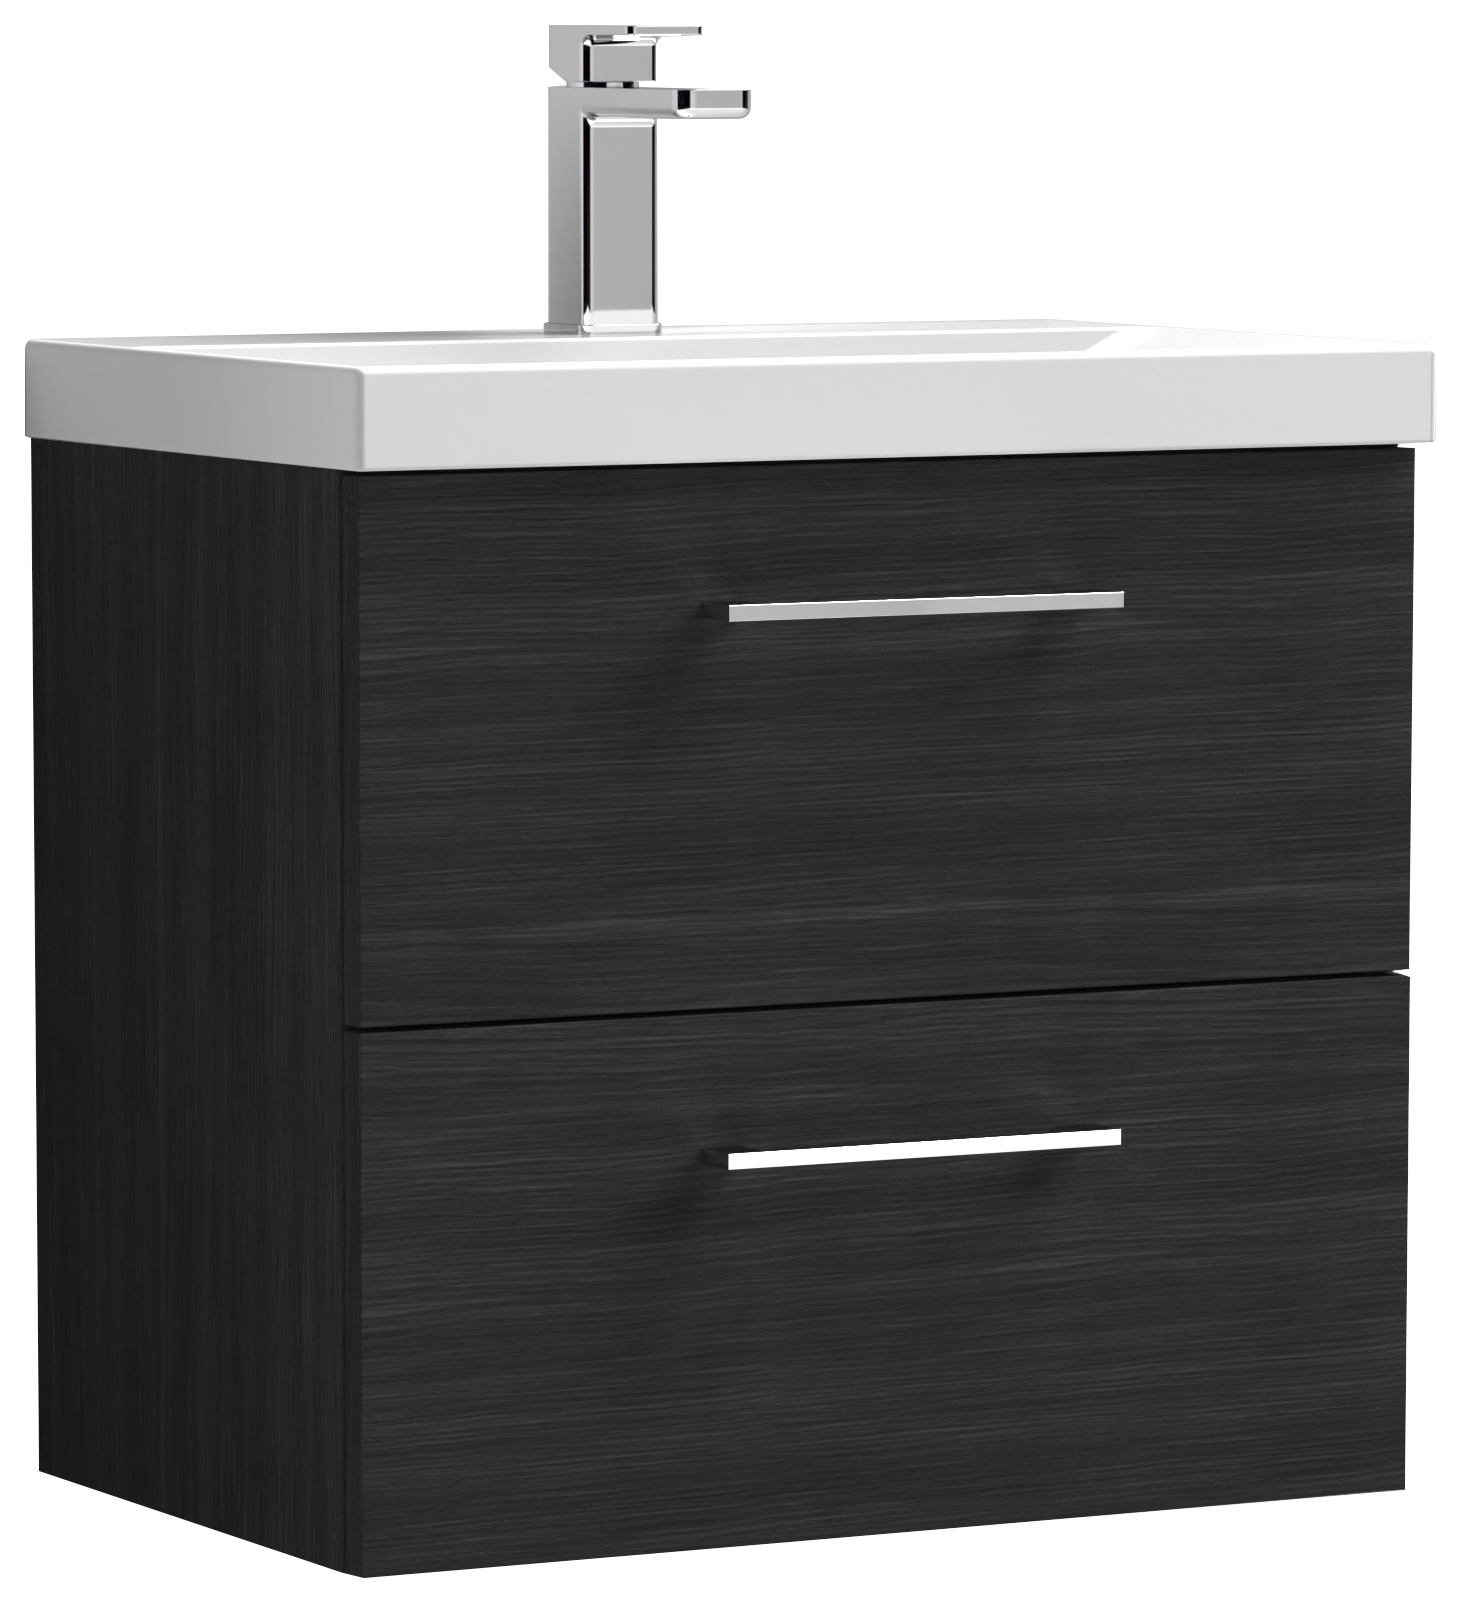 Nuie Arno Charcoal Black Wall Hung 2 Drawer Vanity Unit & Basin - 579 x 610mm